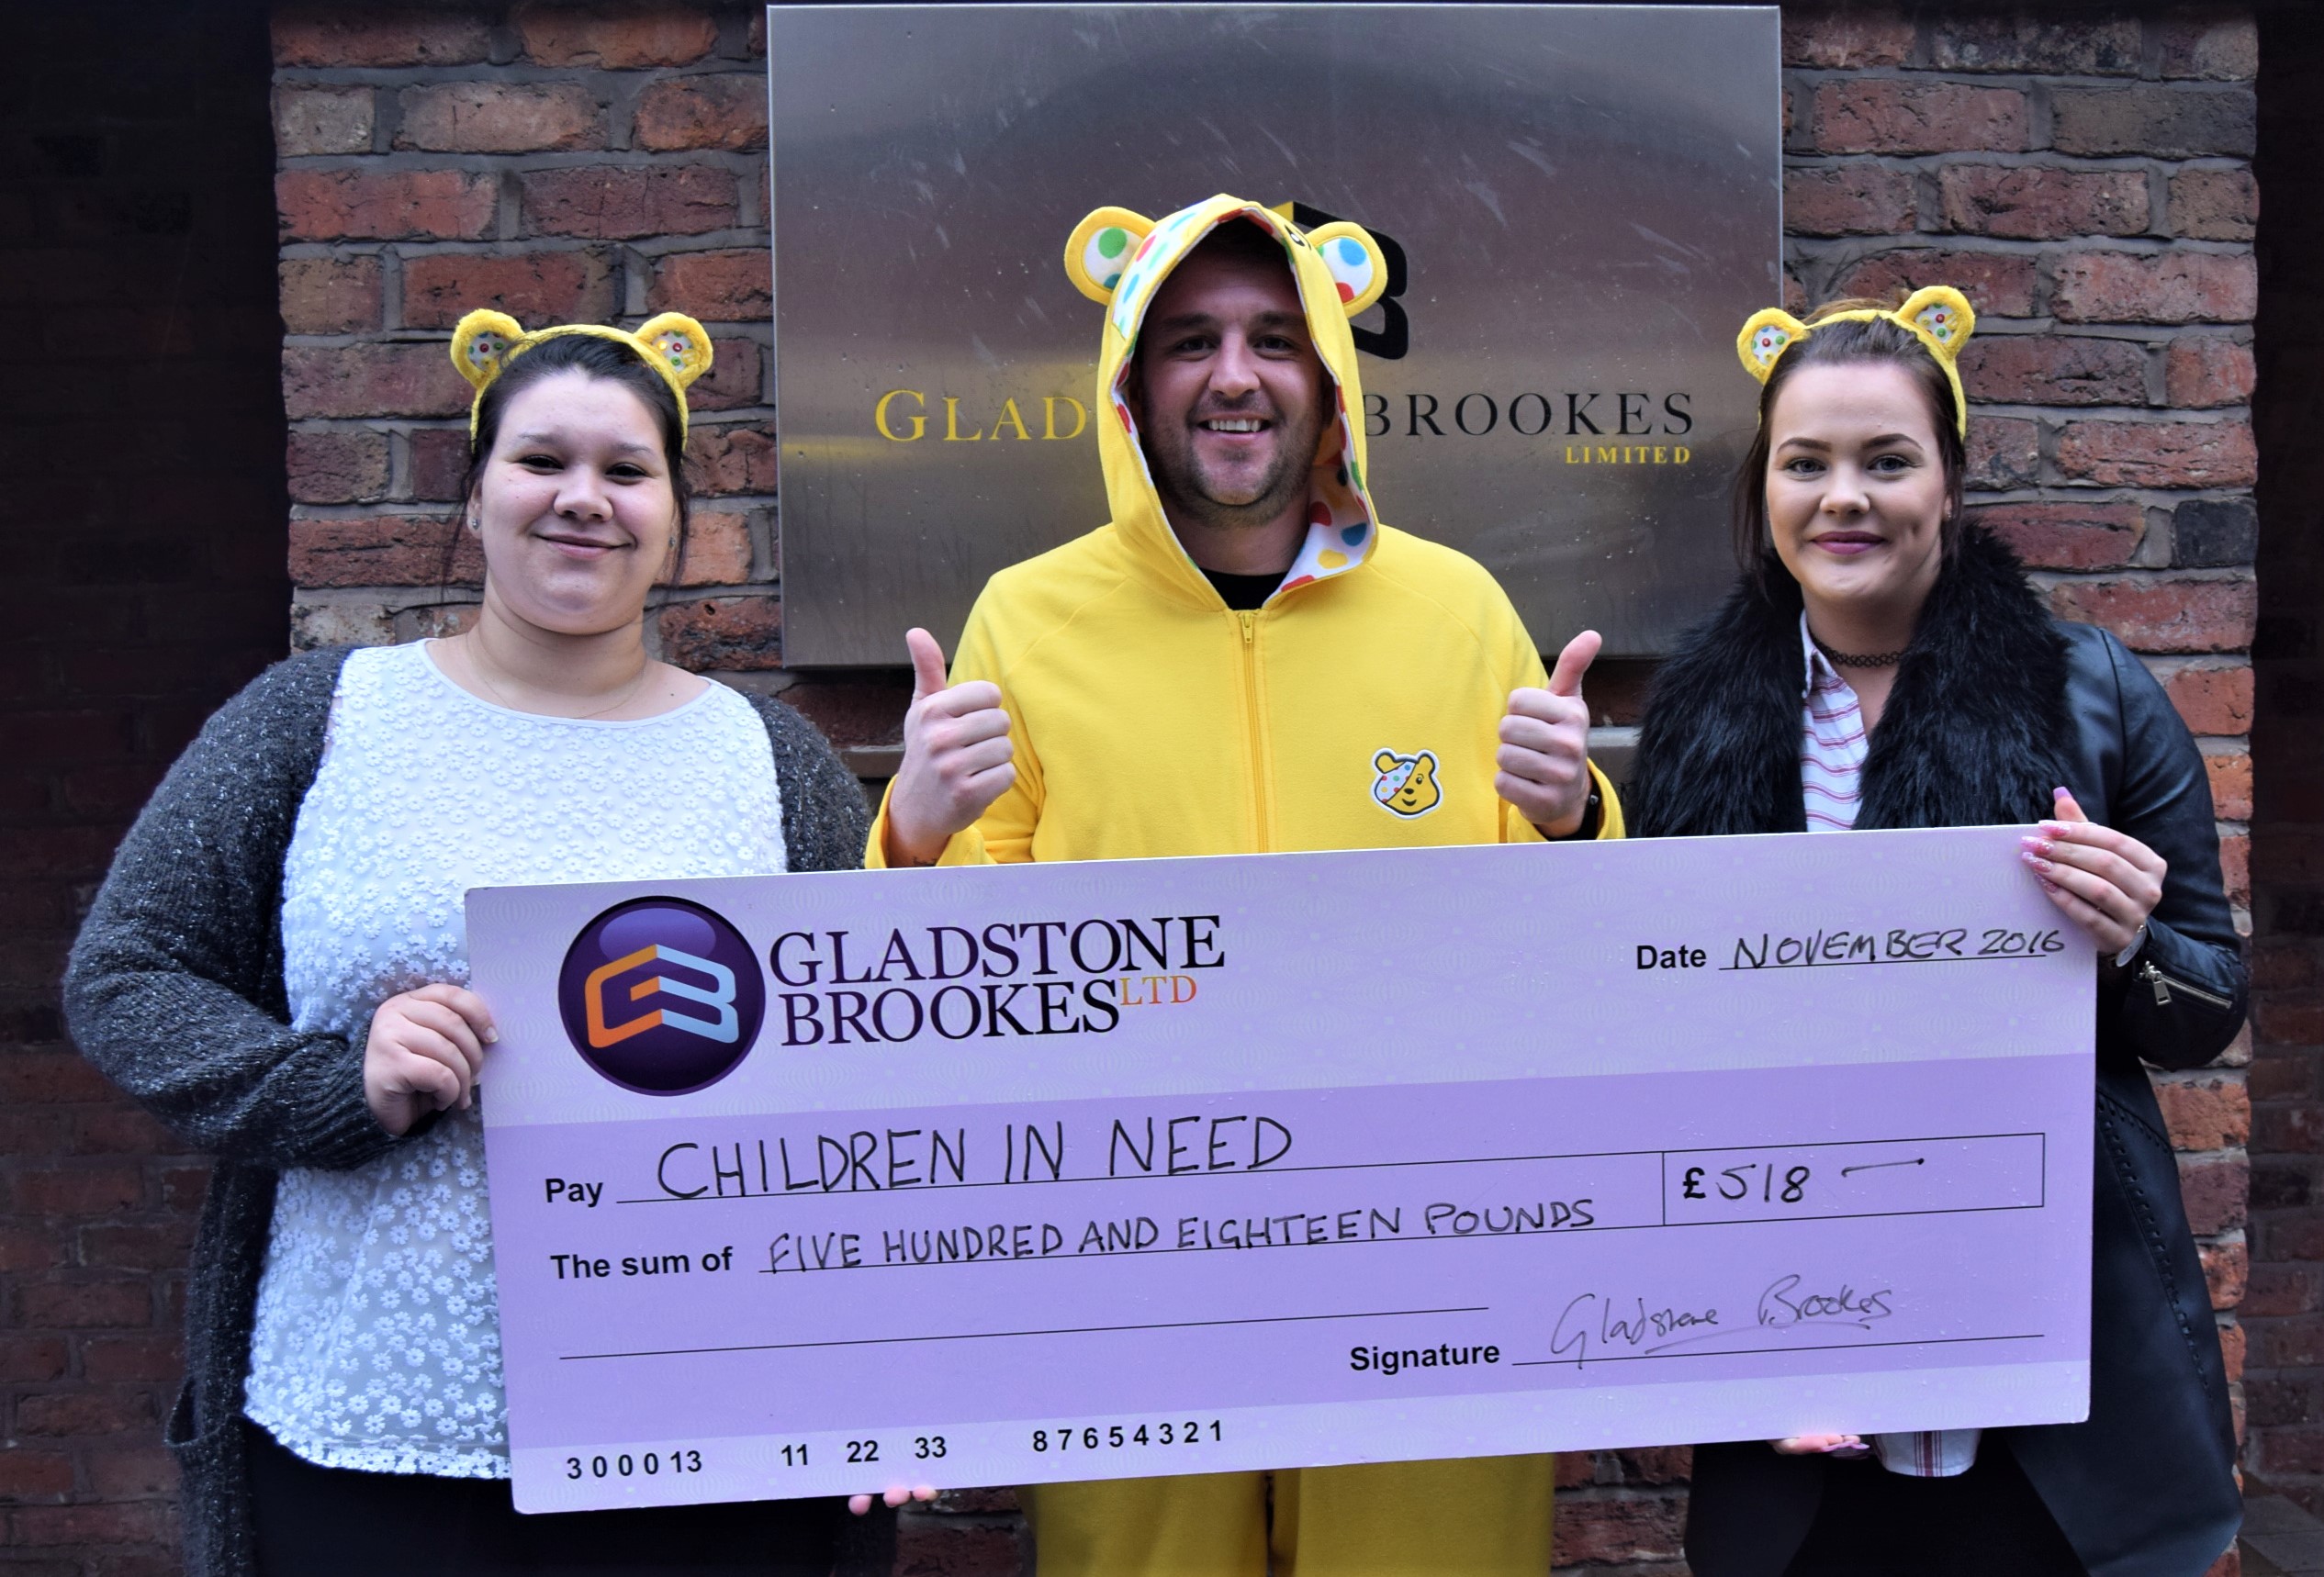 Gladstone Brookes CHARITY OF THE MONTH Children In Need